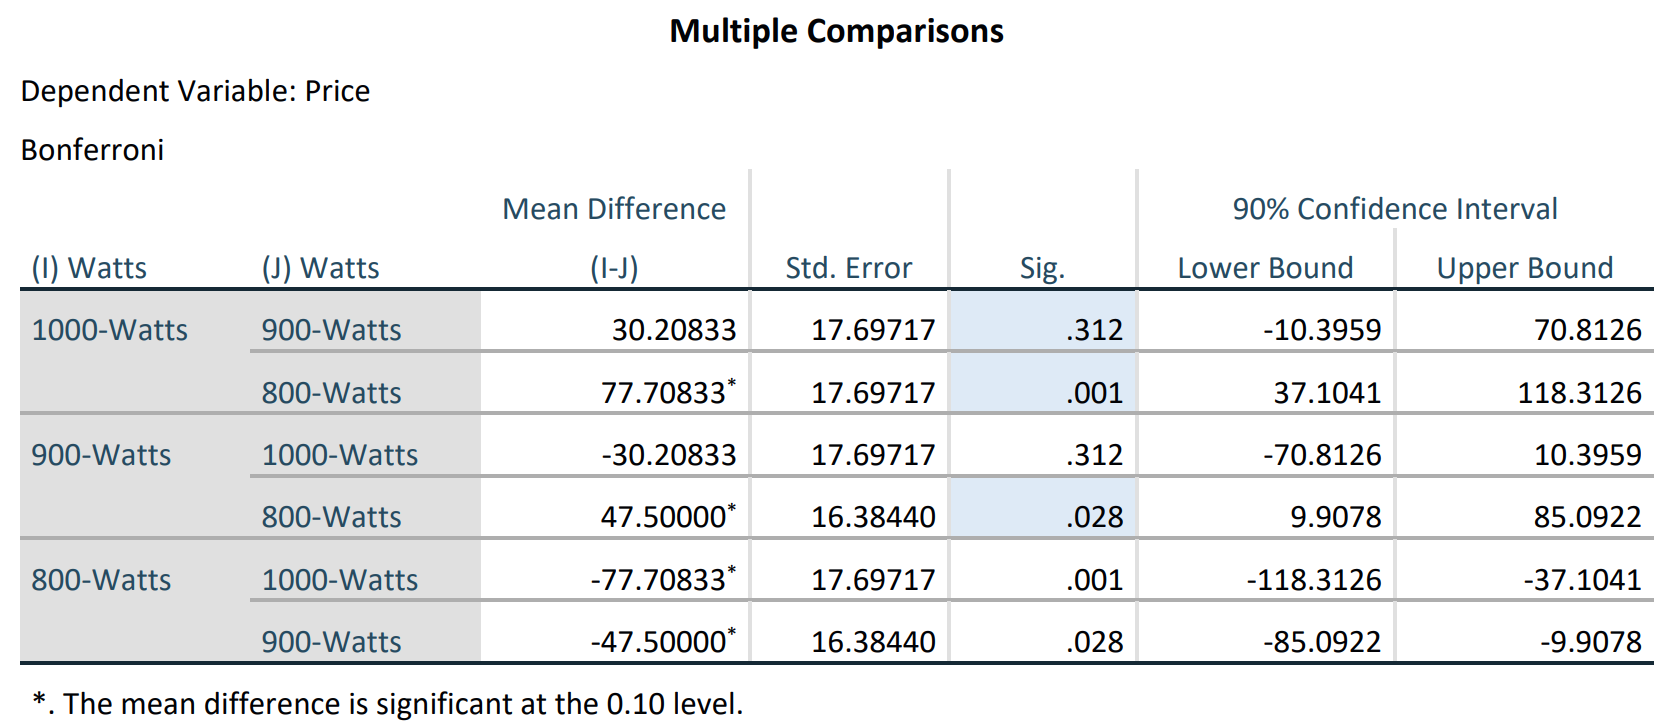 SPSS-generated Multiple Comparisons table for microwave data.